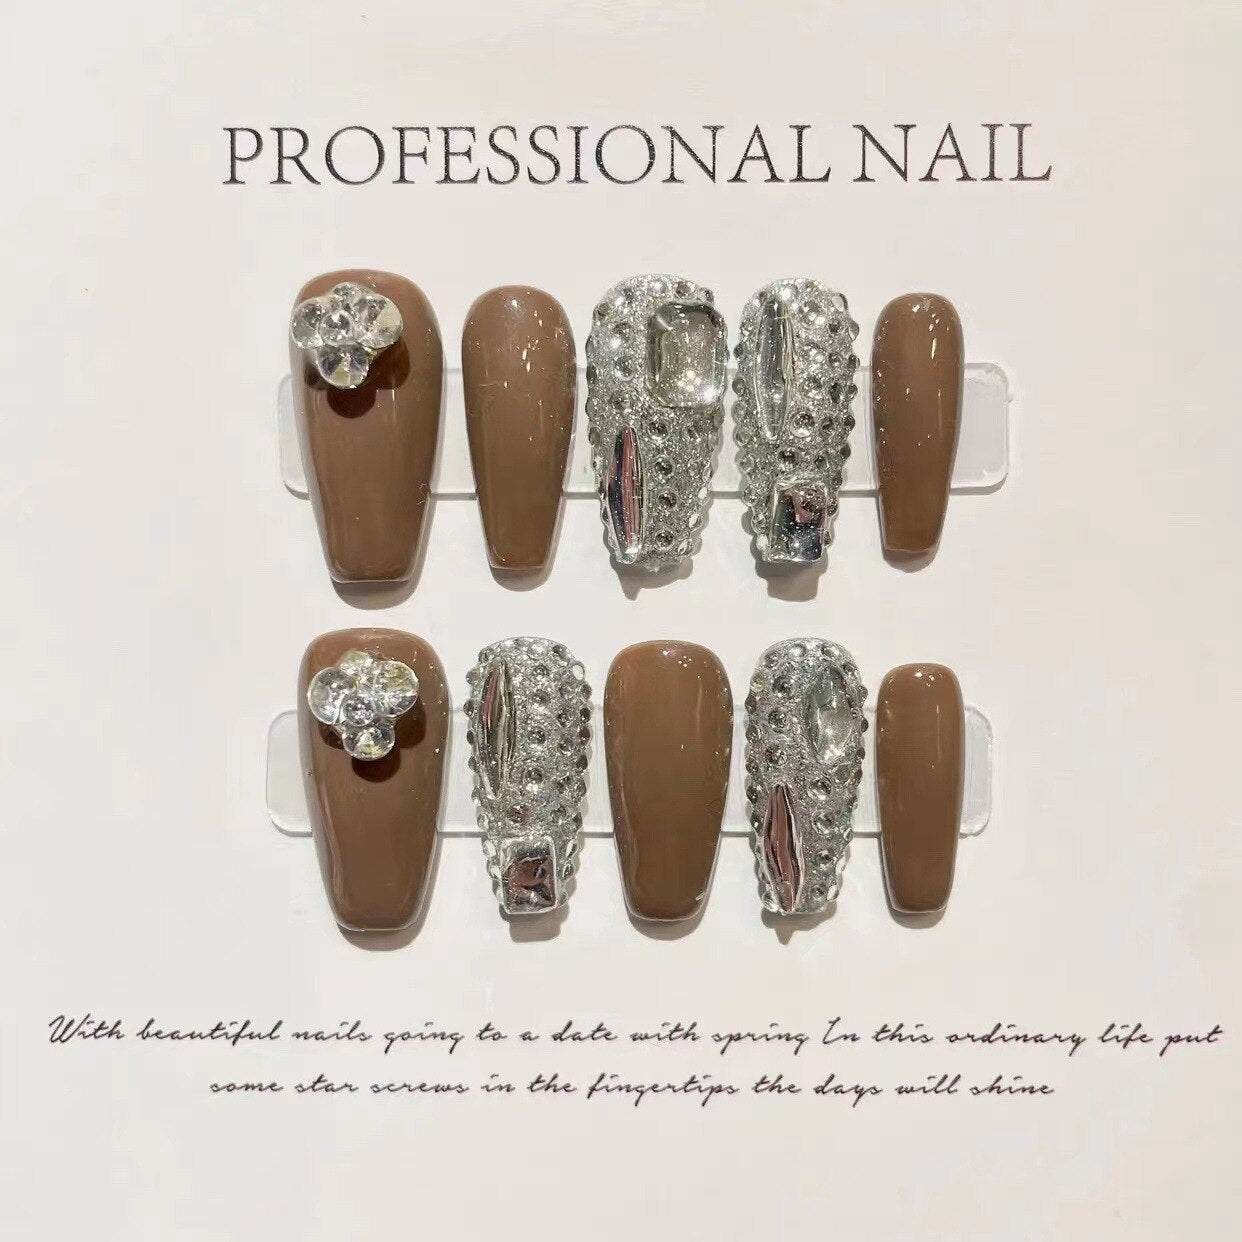 76-90 Number Parl Decoration Handmade Press on Nails With Glue Wearable Fake Nails For Girl Advanced Professional Nail Art